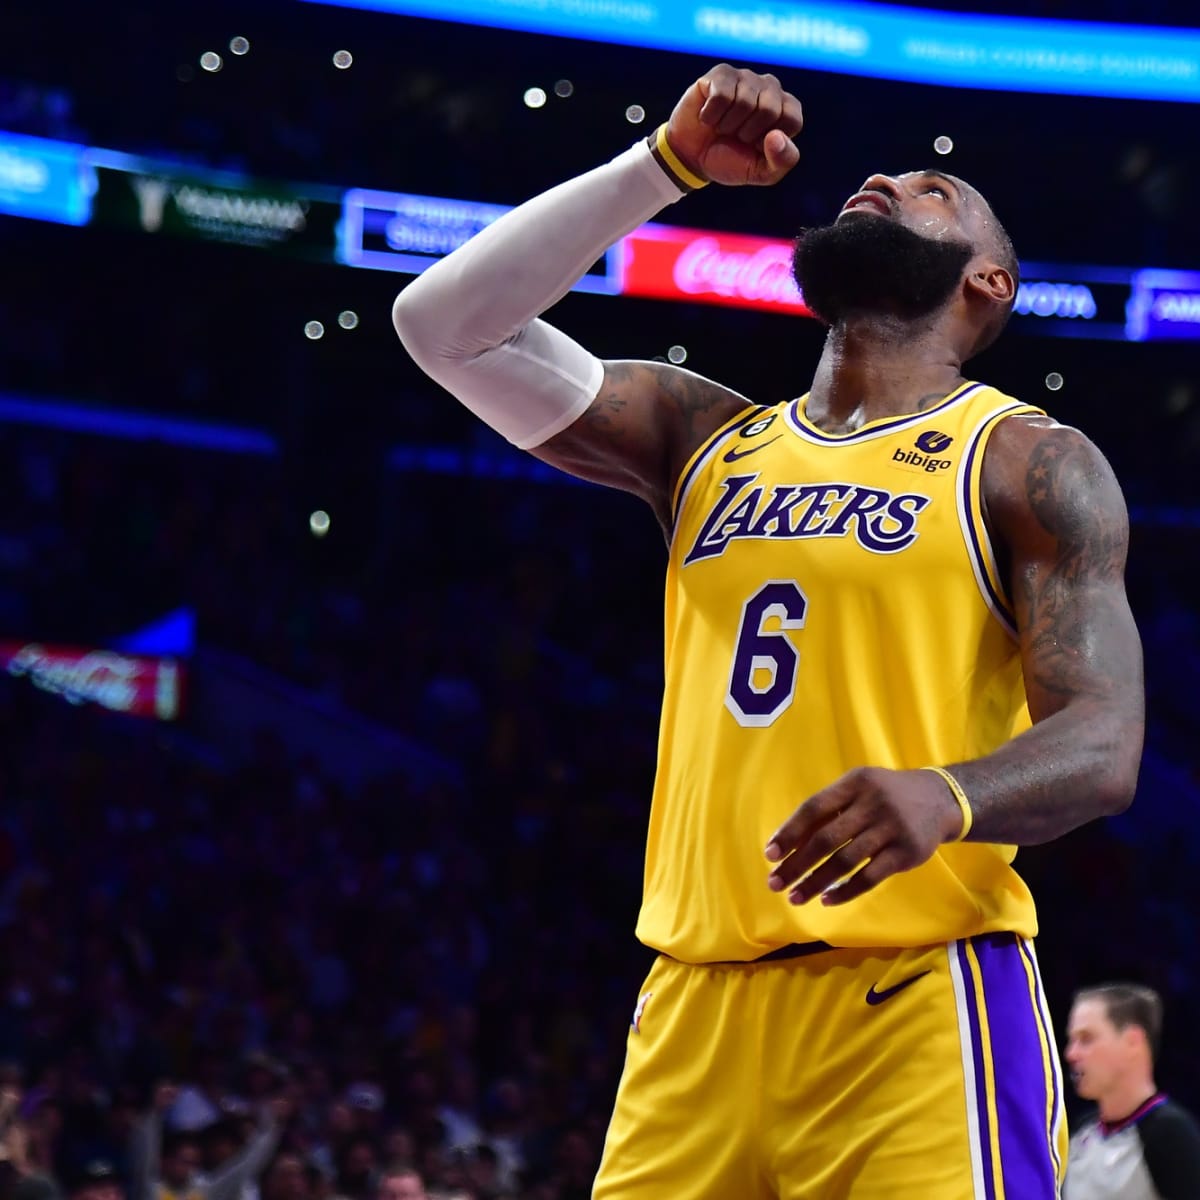 LeBron James displays perfect image via social media after Dodgers go up  2-0 on Padres - Lakers Daily